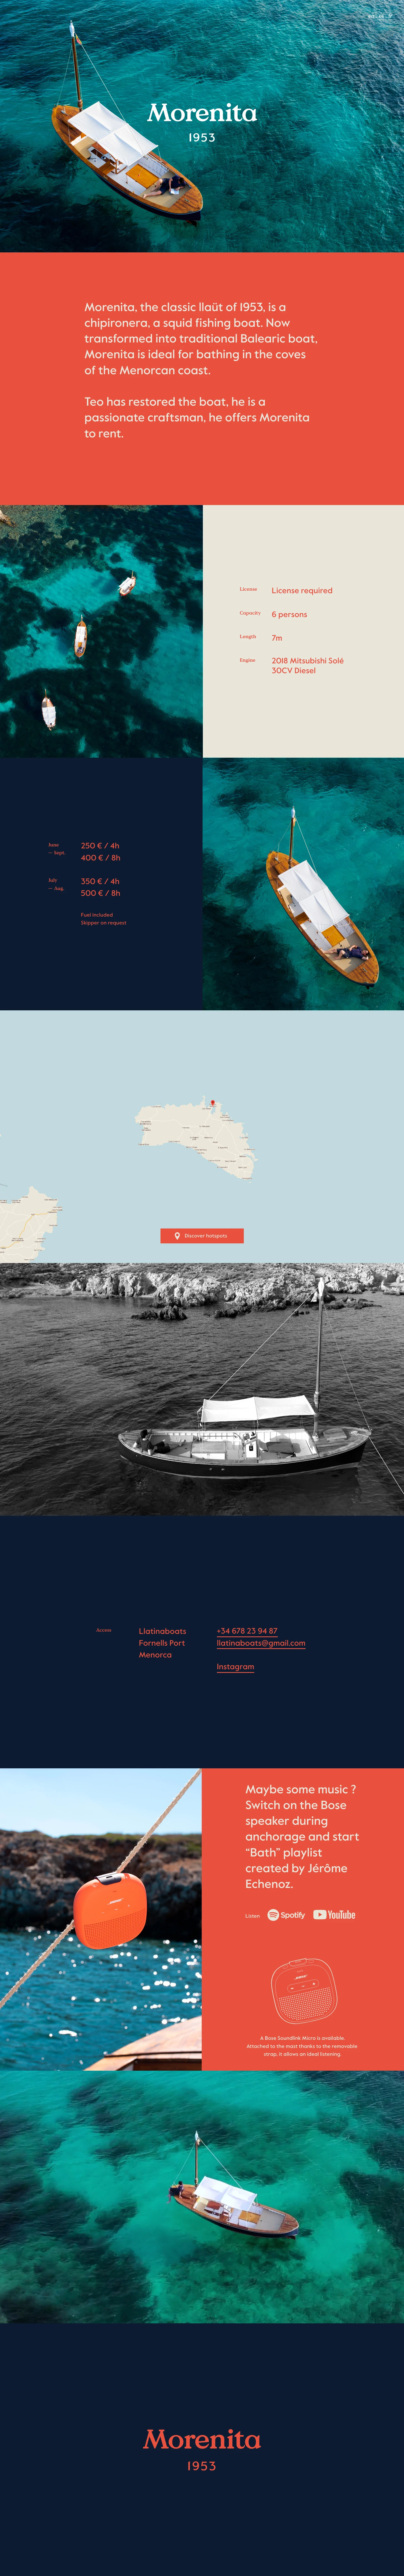 Morenita Landing Page Example: Morenita, the classic llaüt of 1953, is a chipironera, a squid fishing boat. Now transformed into traditional Balearic boat, Morenita is ideal for bathing in the coves of the Menorcan coast.